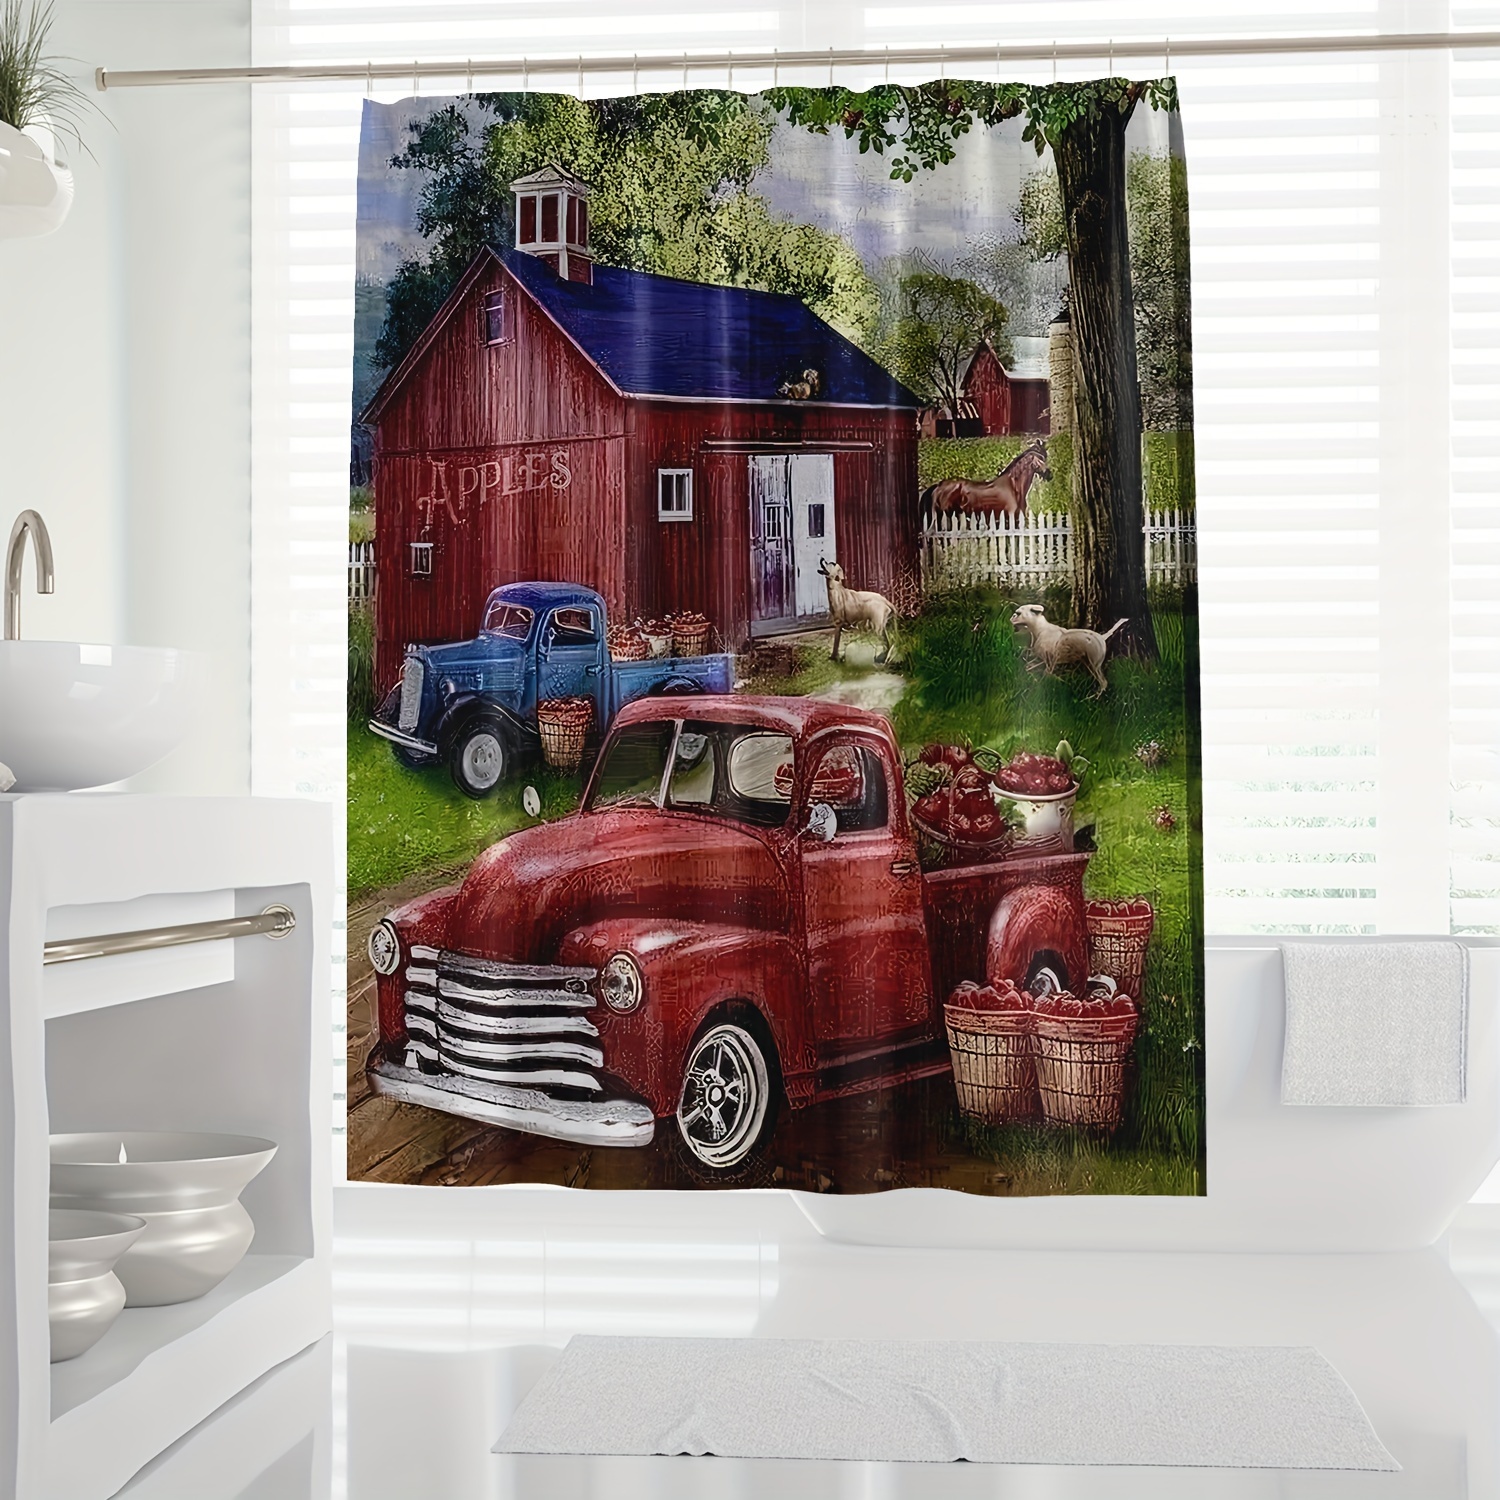 

1pc Rustic Farmhouse Shower Curtain With Vintage Red Truck And Harvest Design, Autumn Scene Digital Print, Bathroom Decor, 70.87x70.87 Inches Waterproof Bath Curtain